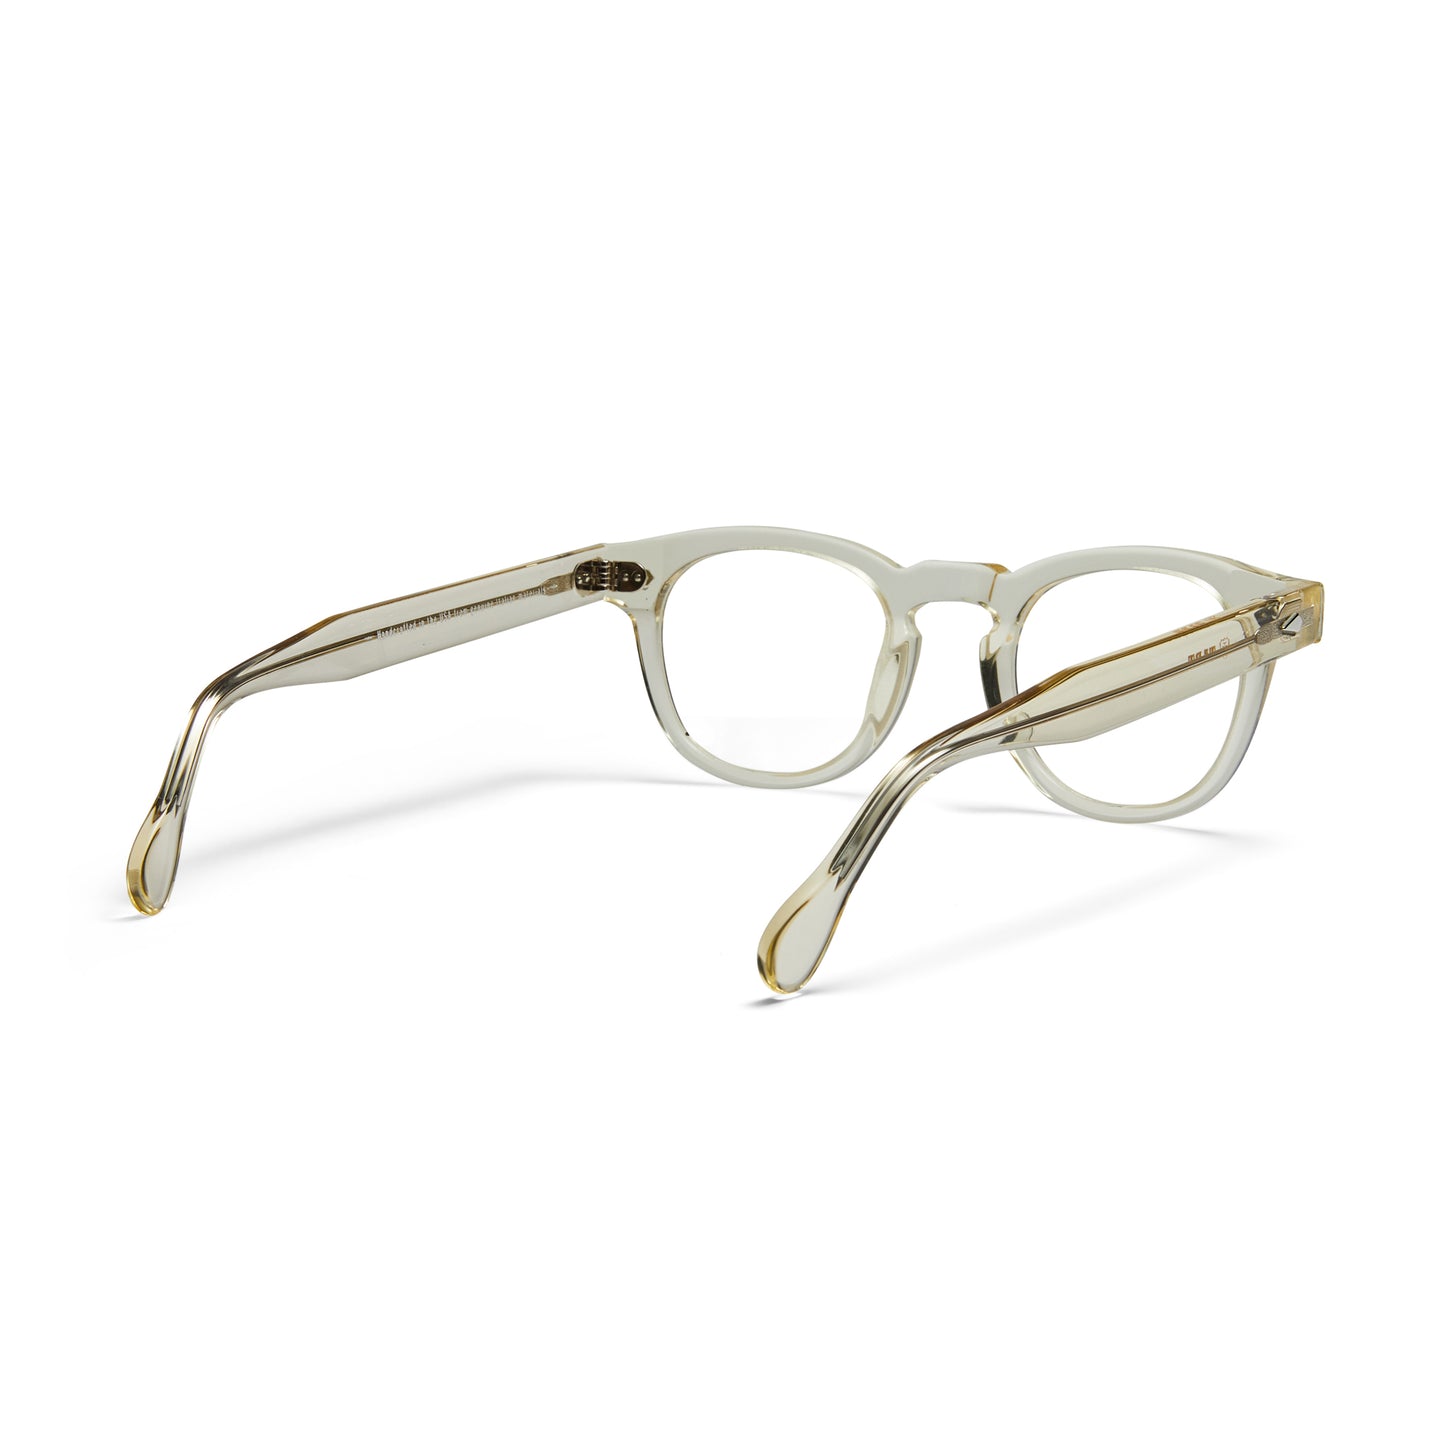 A back view of the champaign Arnel USA frame—the Vintage eyewear. 